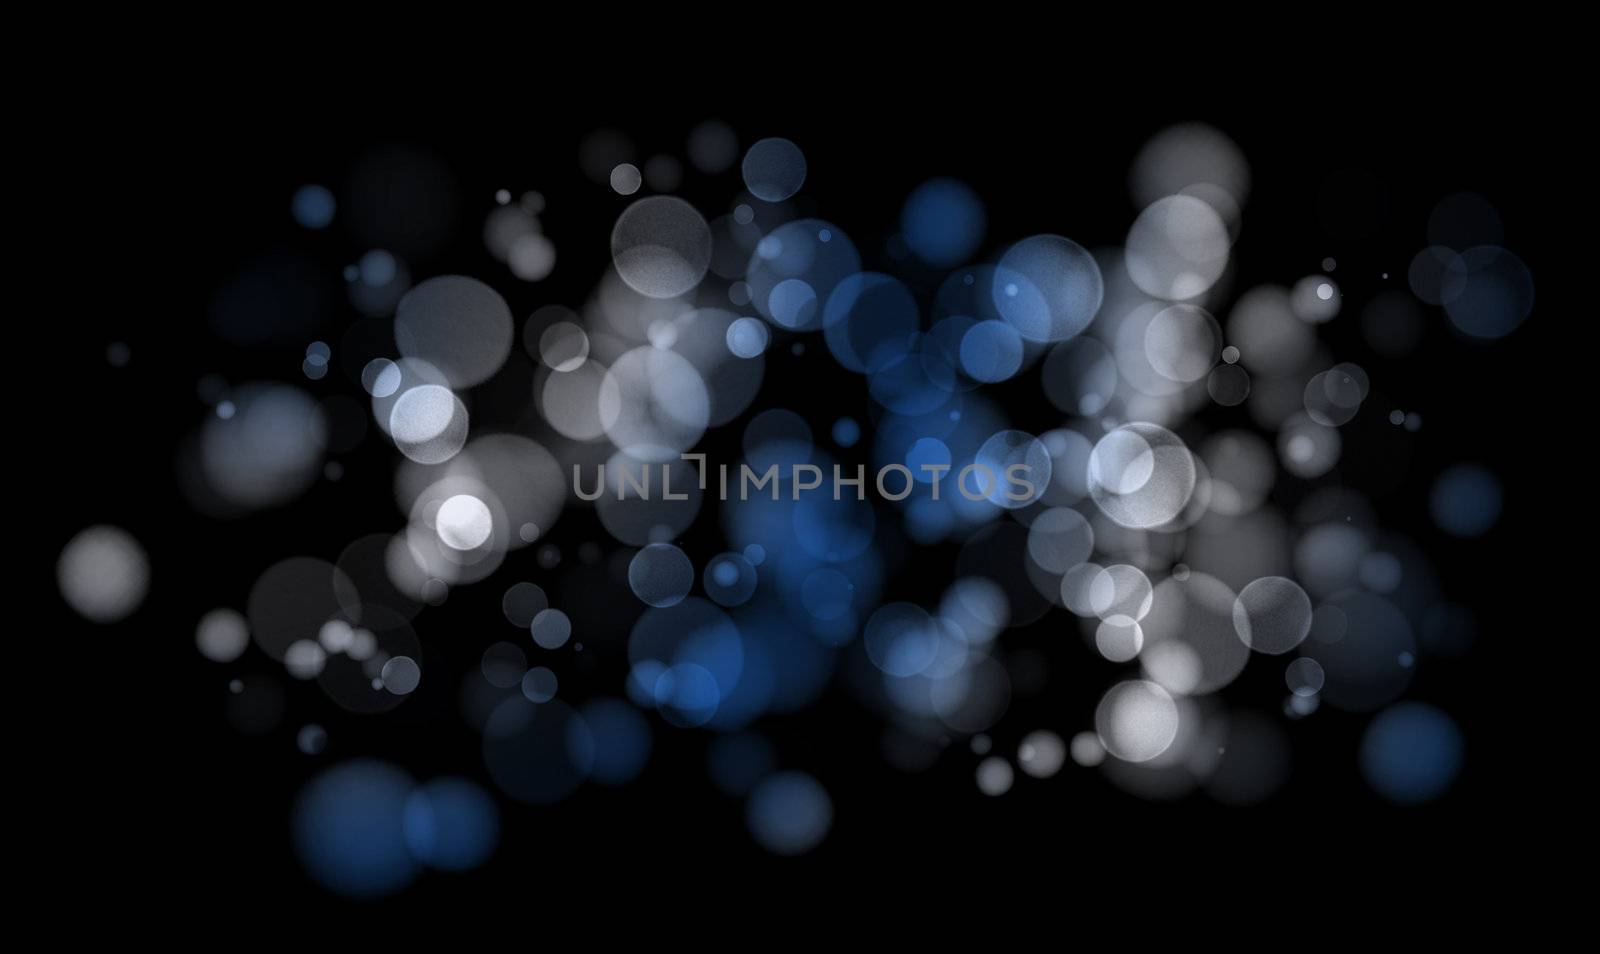 Glowing Christmas light abstract background - Merry Christmas and happy New year